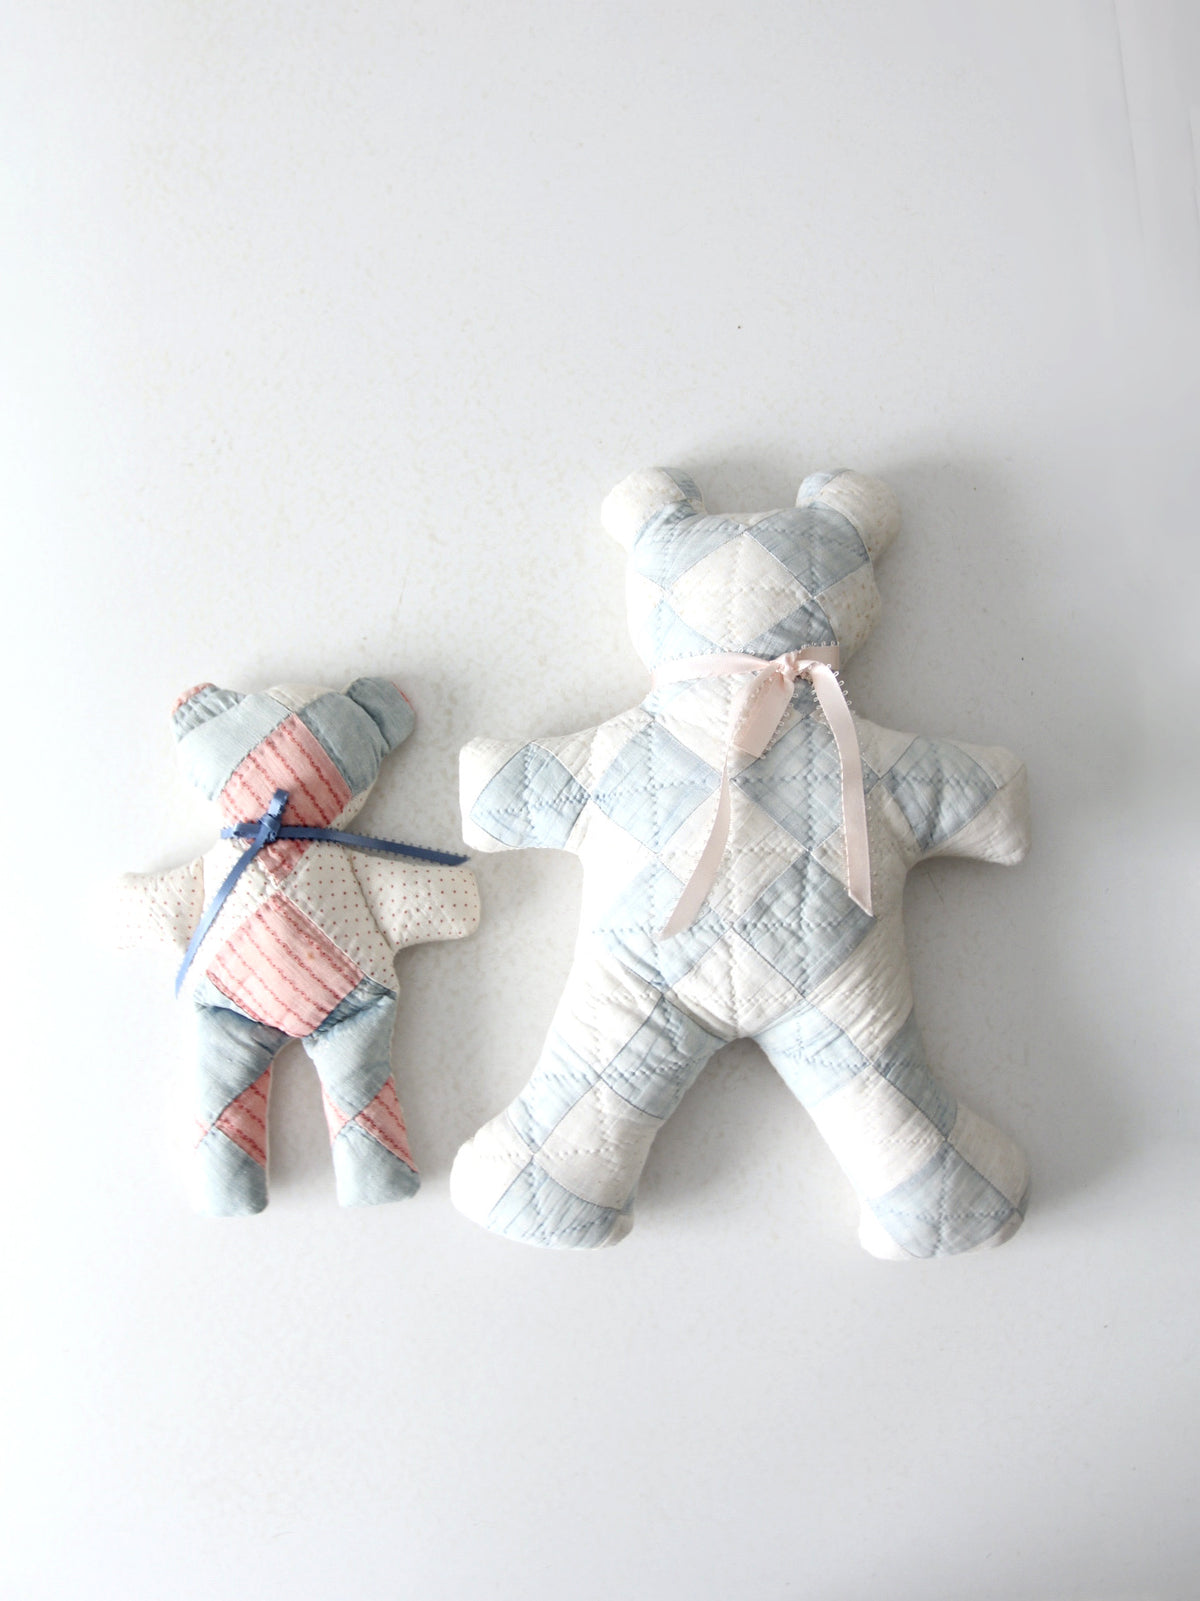 86 Teddy Bear Patterns to Sew at